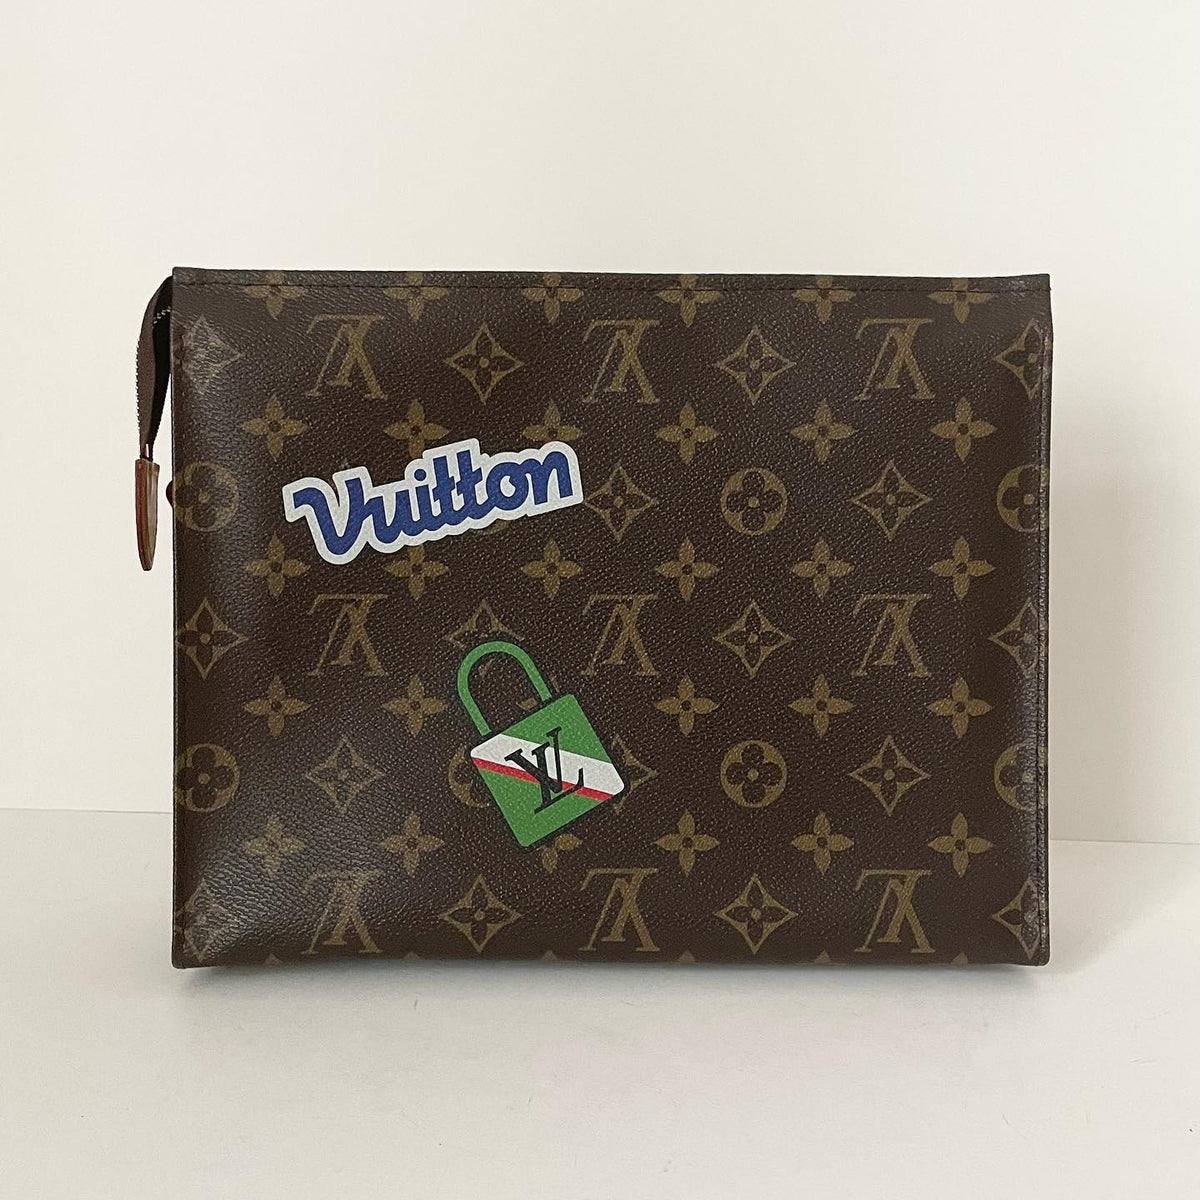 LOUIS VUITTON MONOGRAM TOILETRY POUCH 26 + INSERT & CHUNKY CHAIN